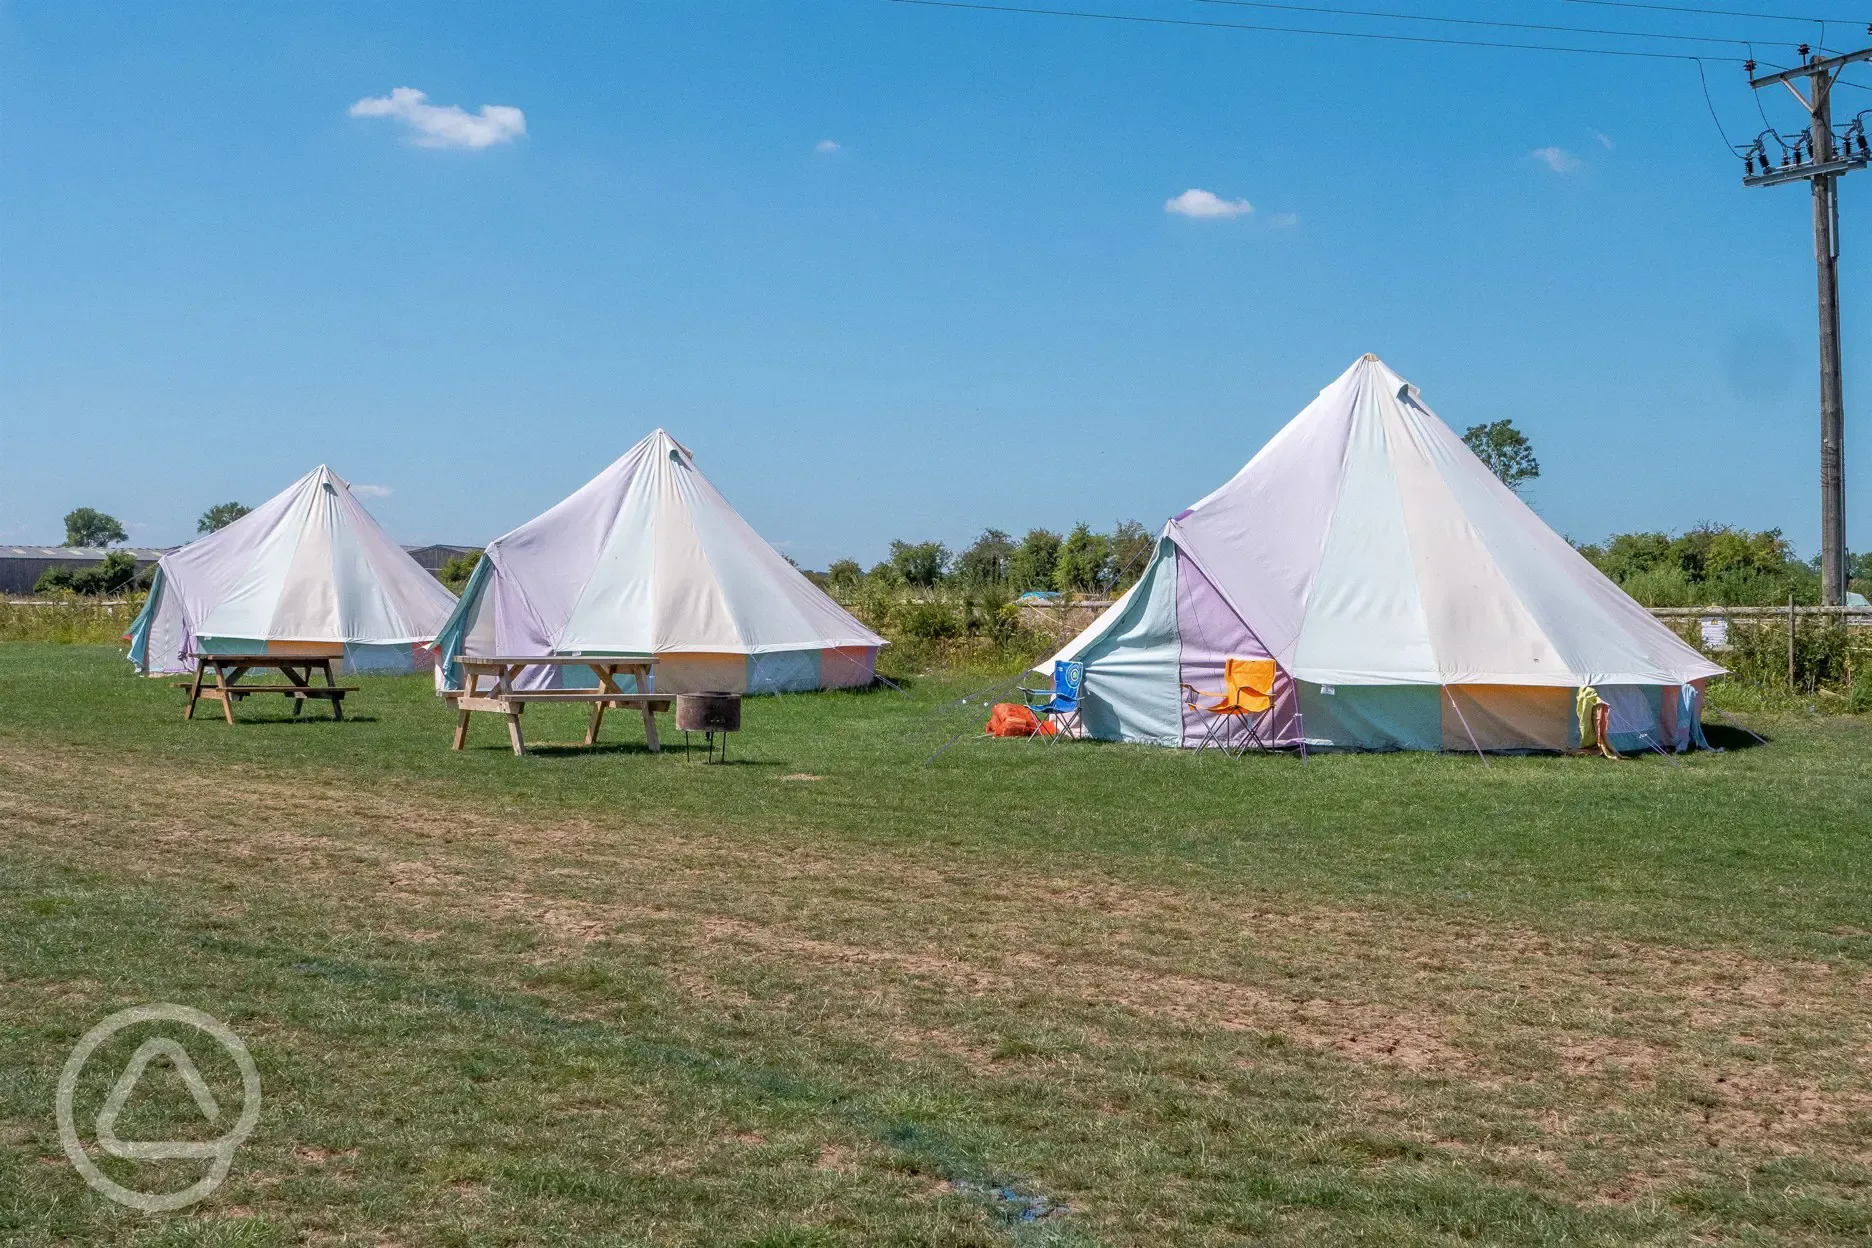 Powered bell tents